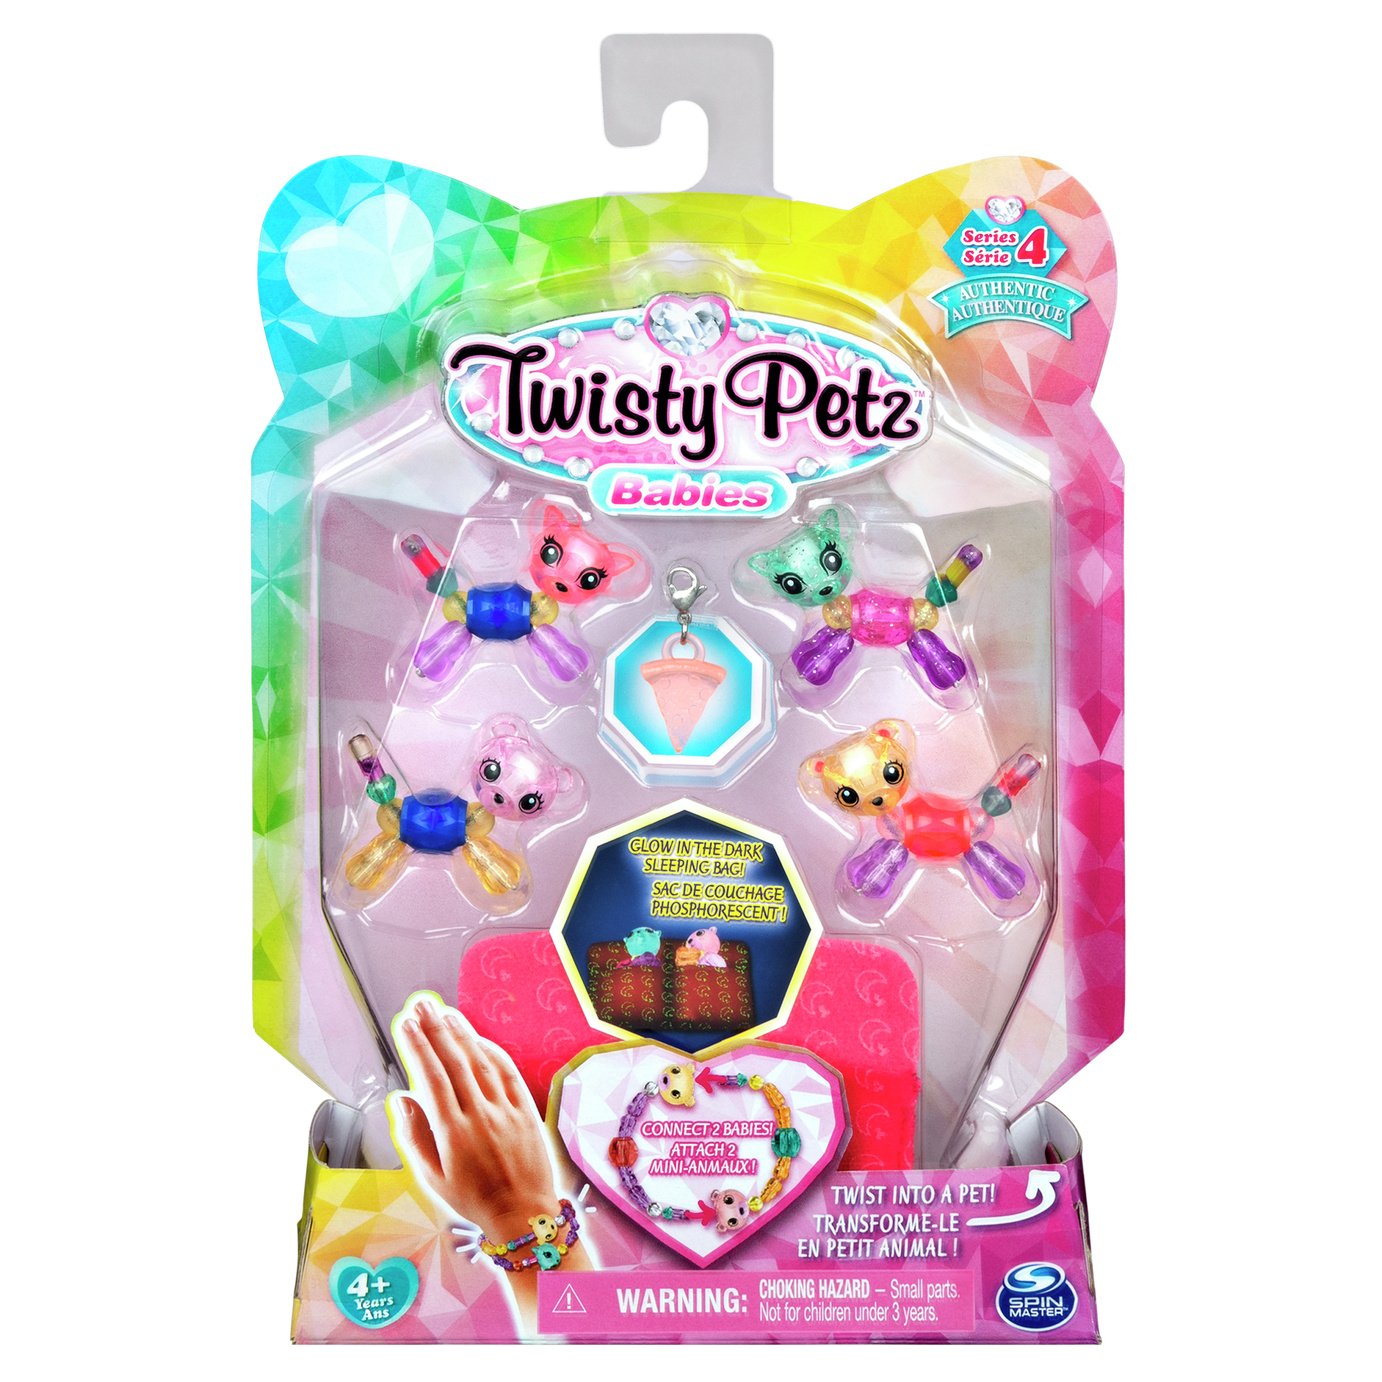 Twisty Pets Babies Review